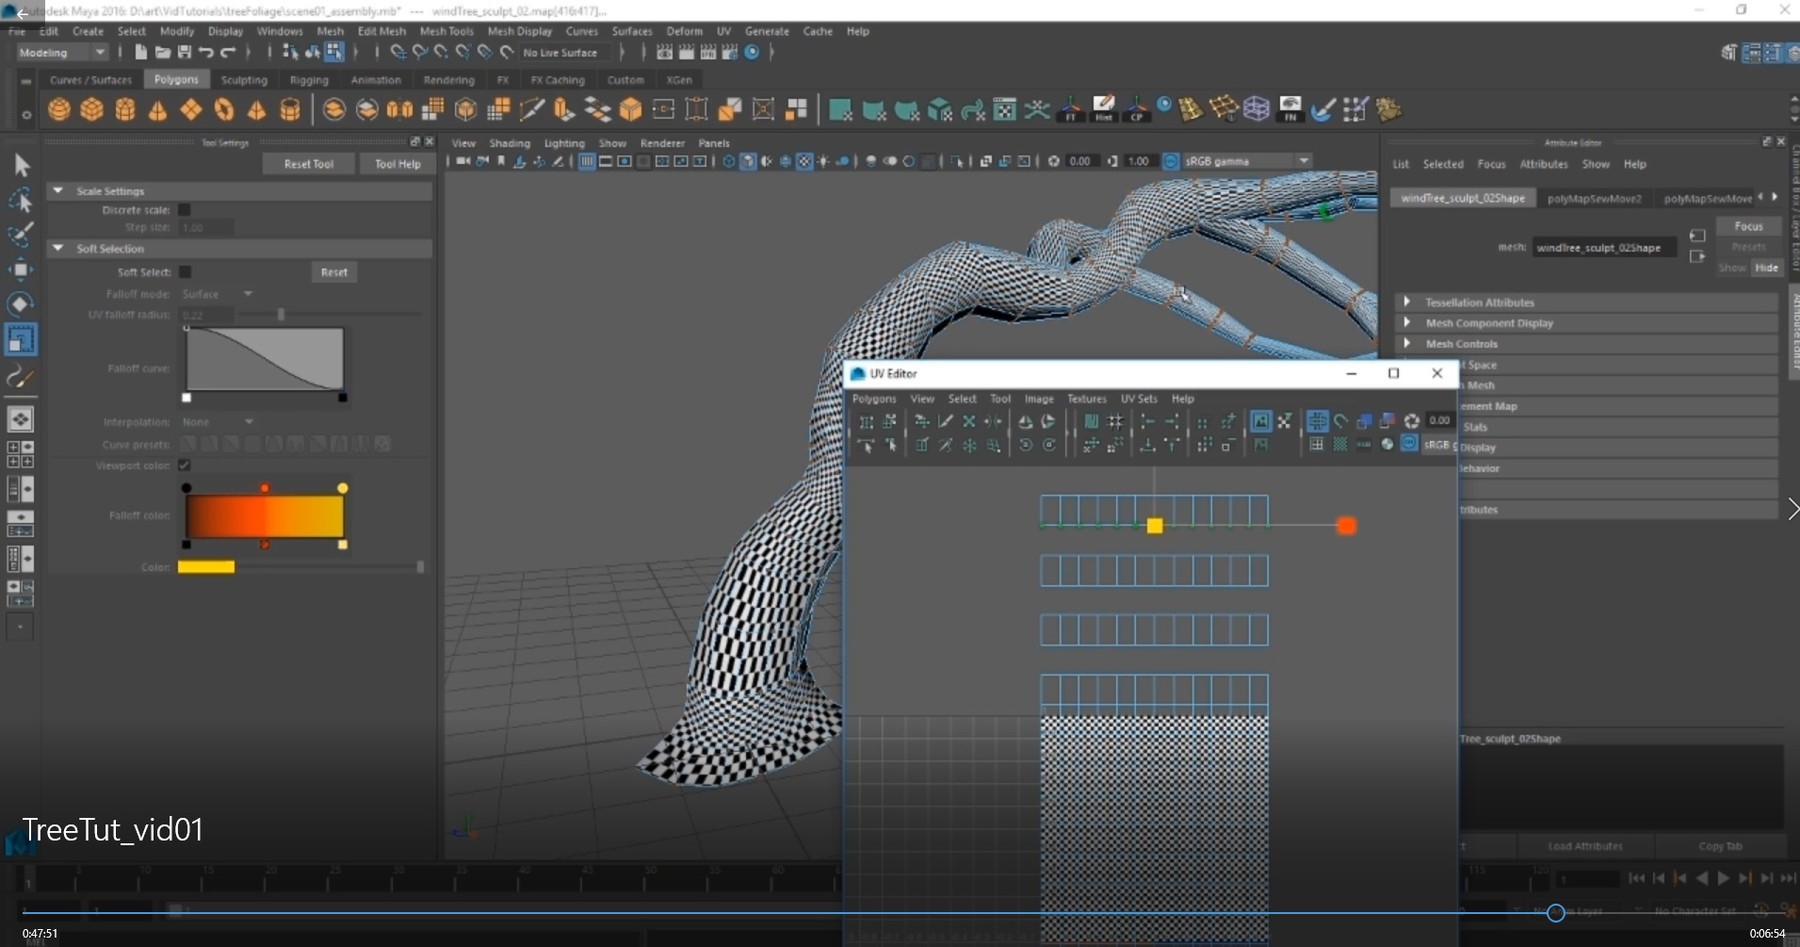 maya assets in zbrush are huge